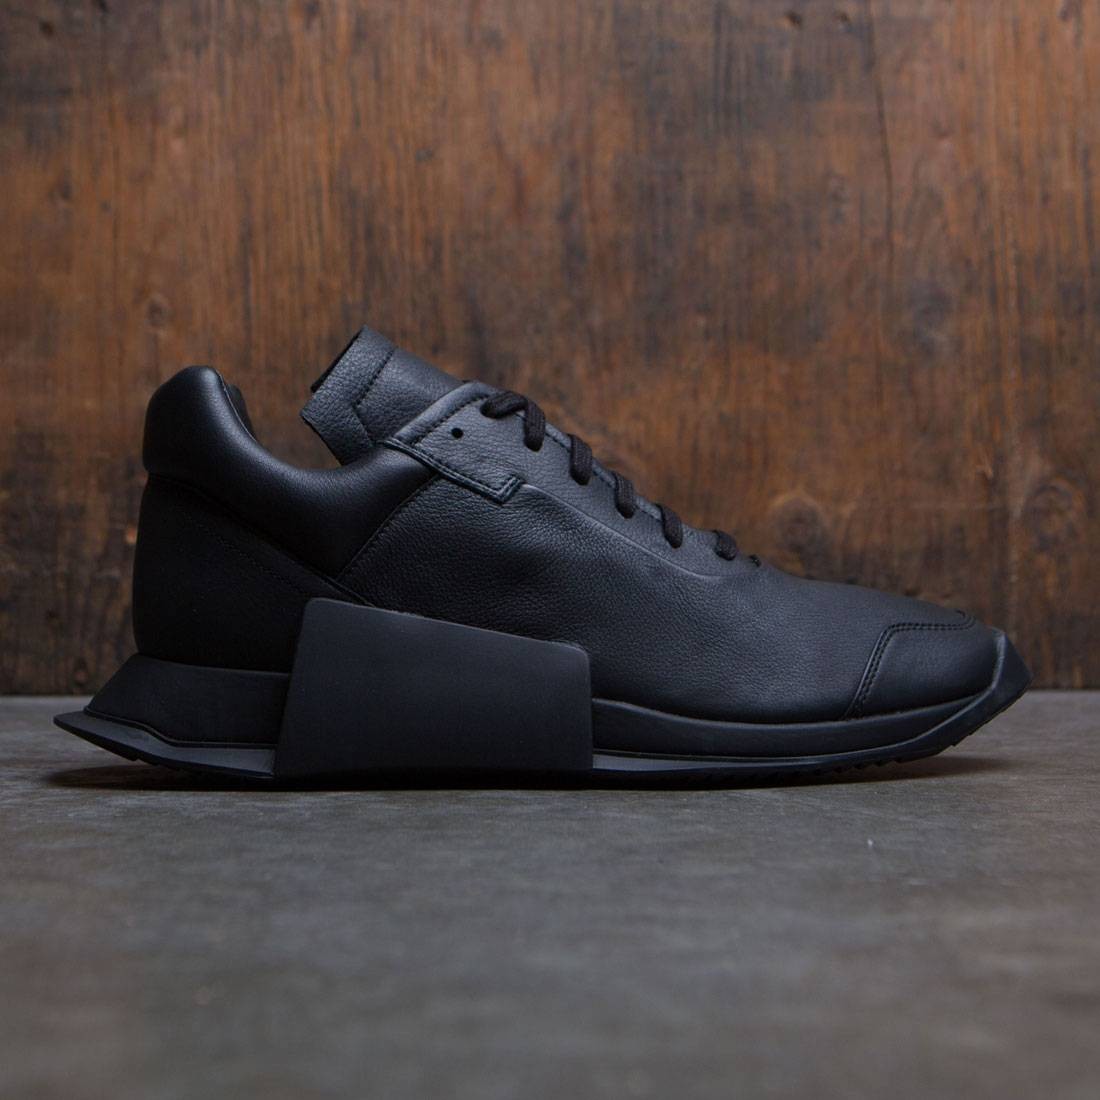 adidas by Rick Owens Level Runner Boost